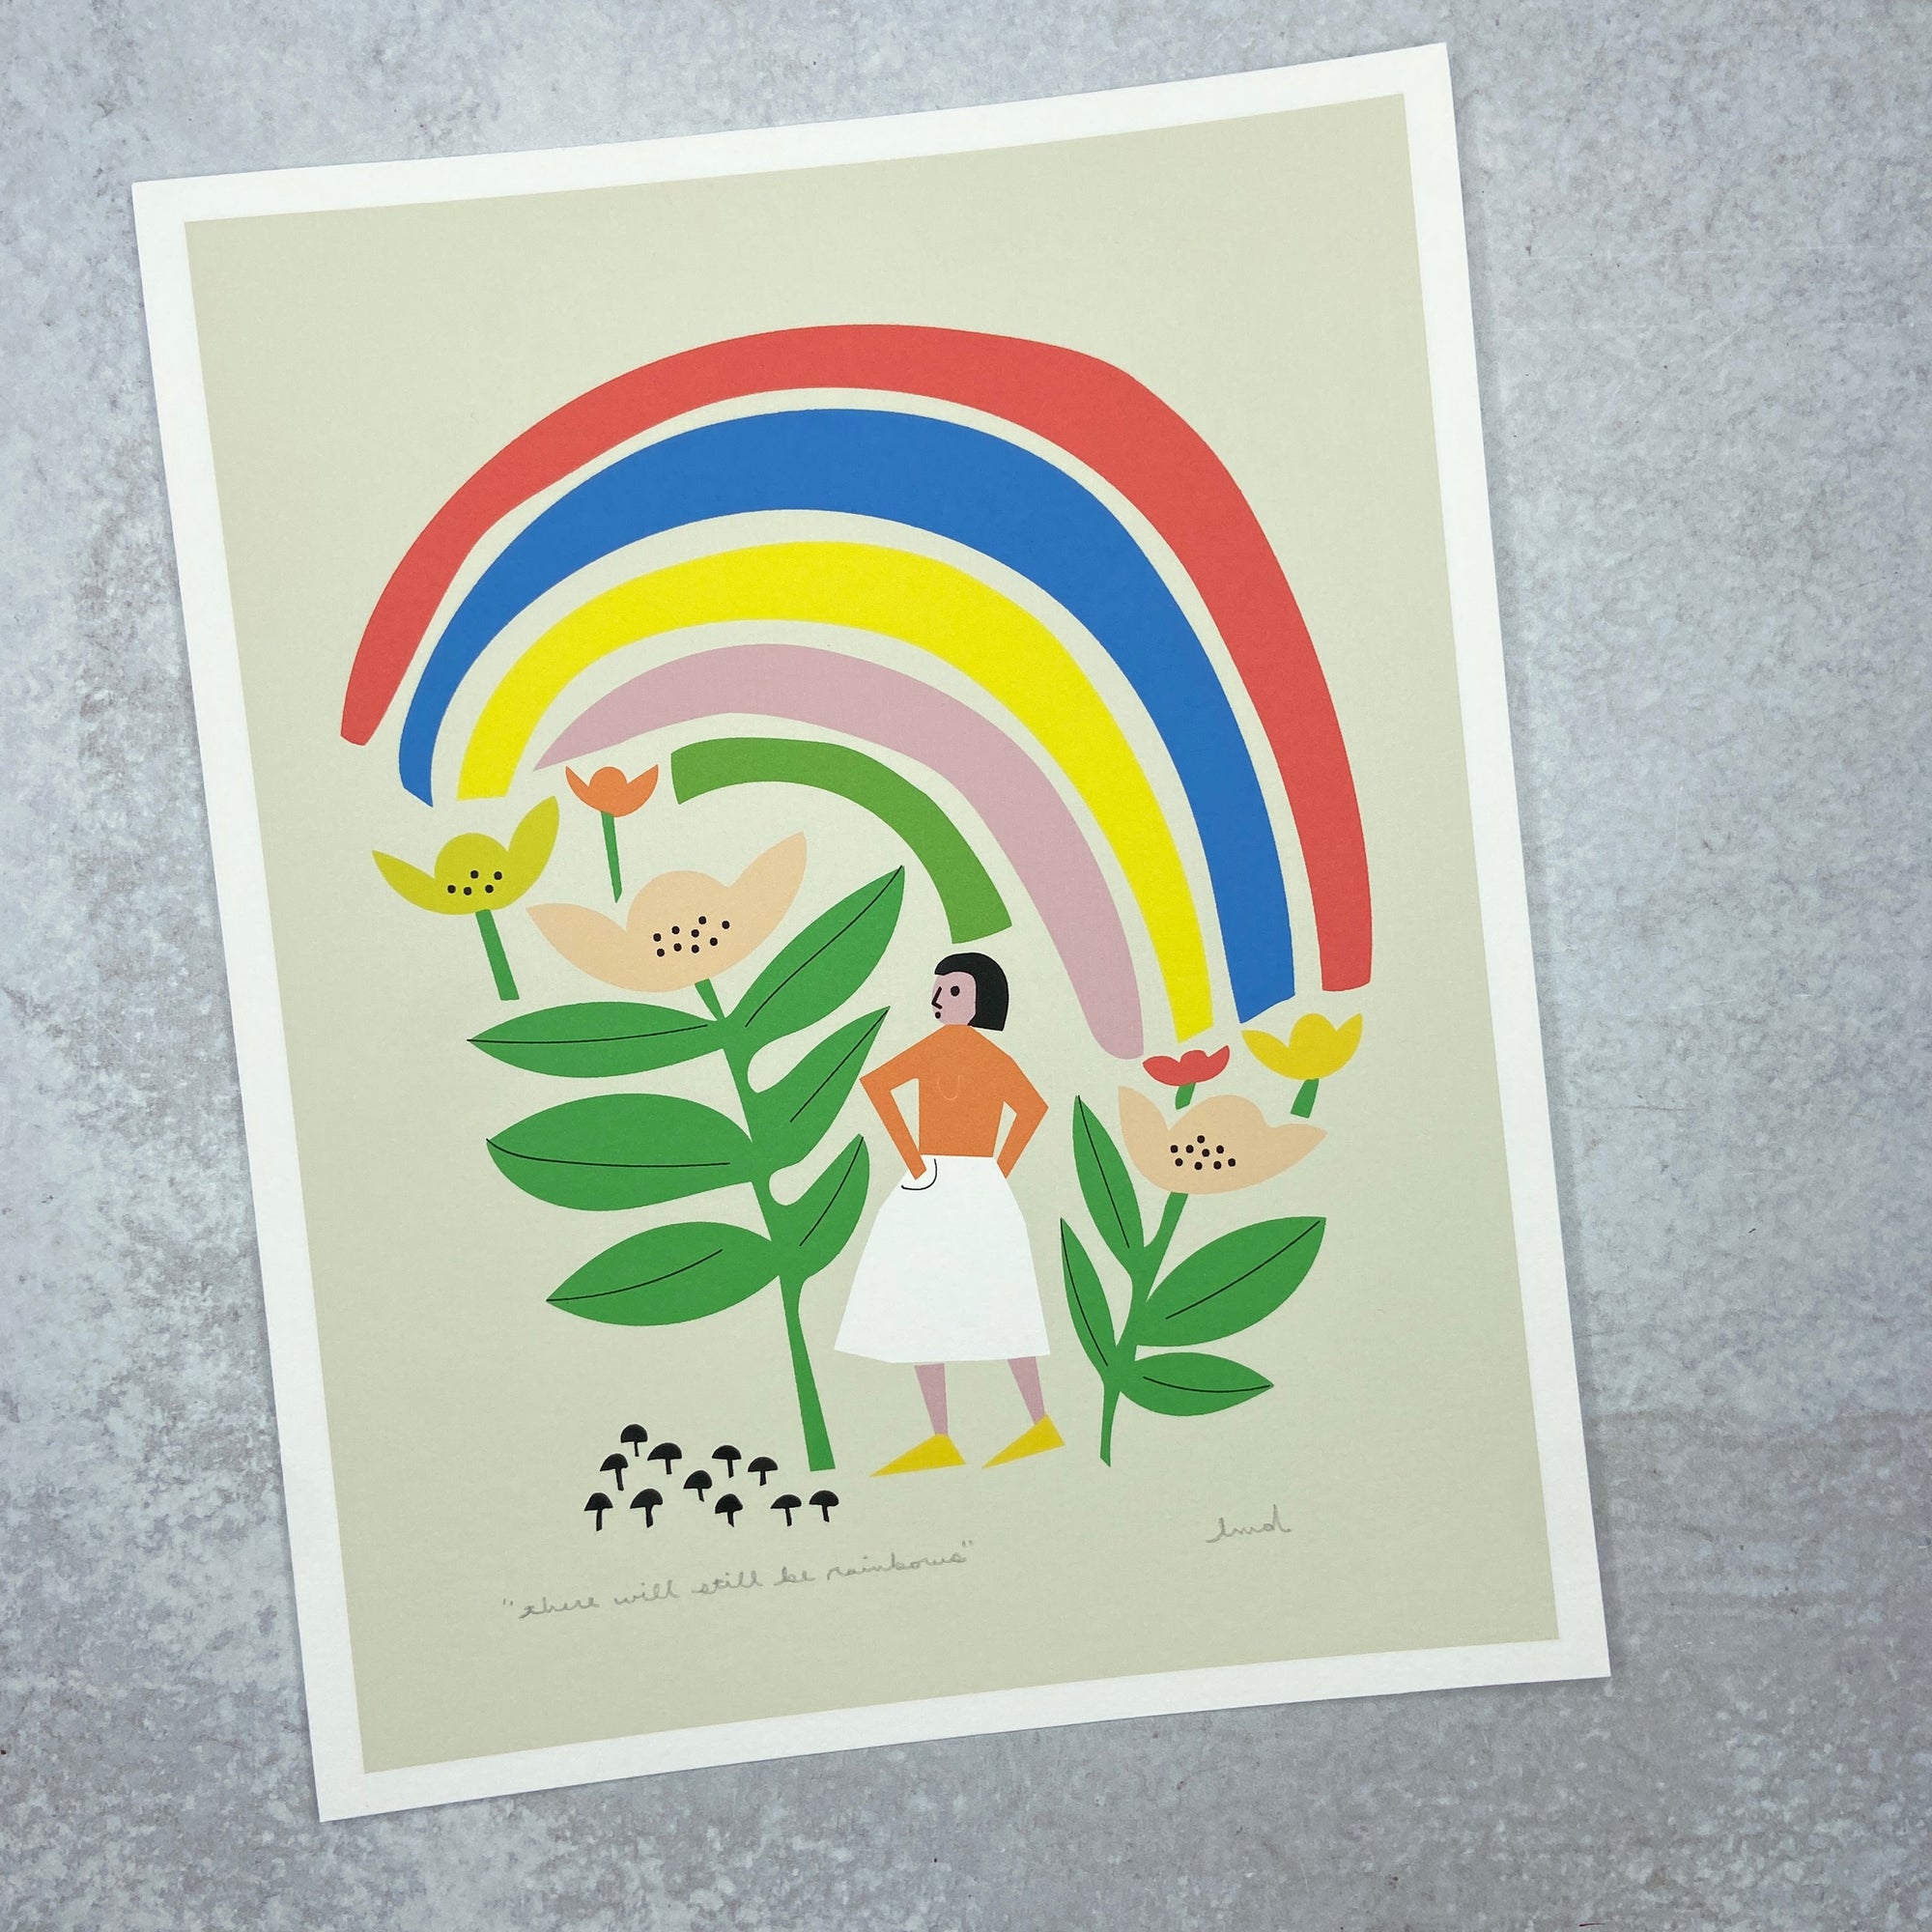 There Will Still Be Rainbows - Print